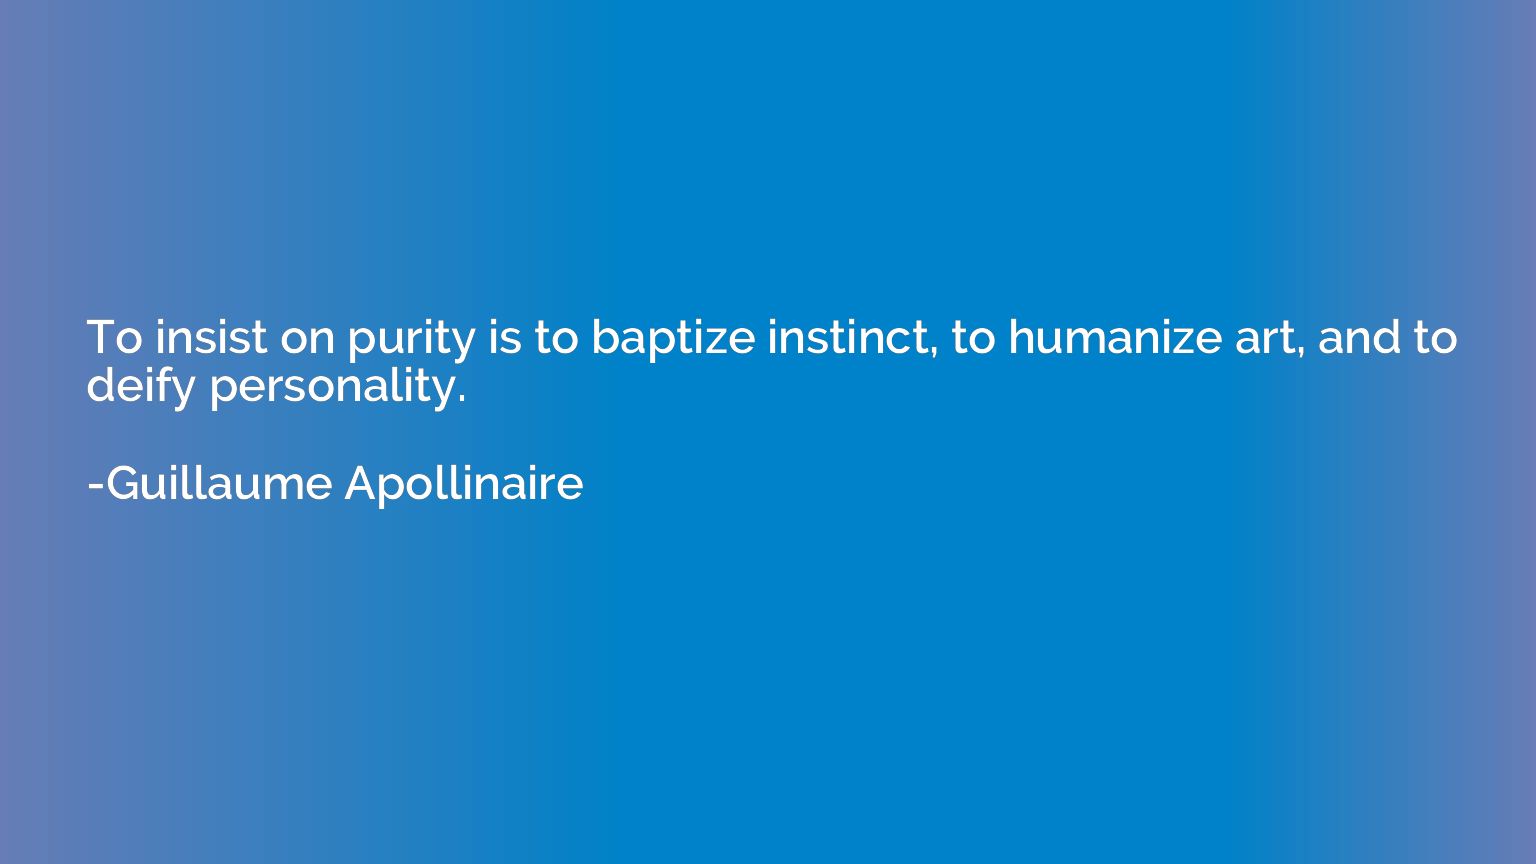 To insist on purity is to baptize instinct, to humanize art,